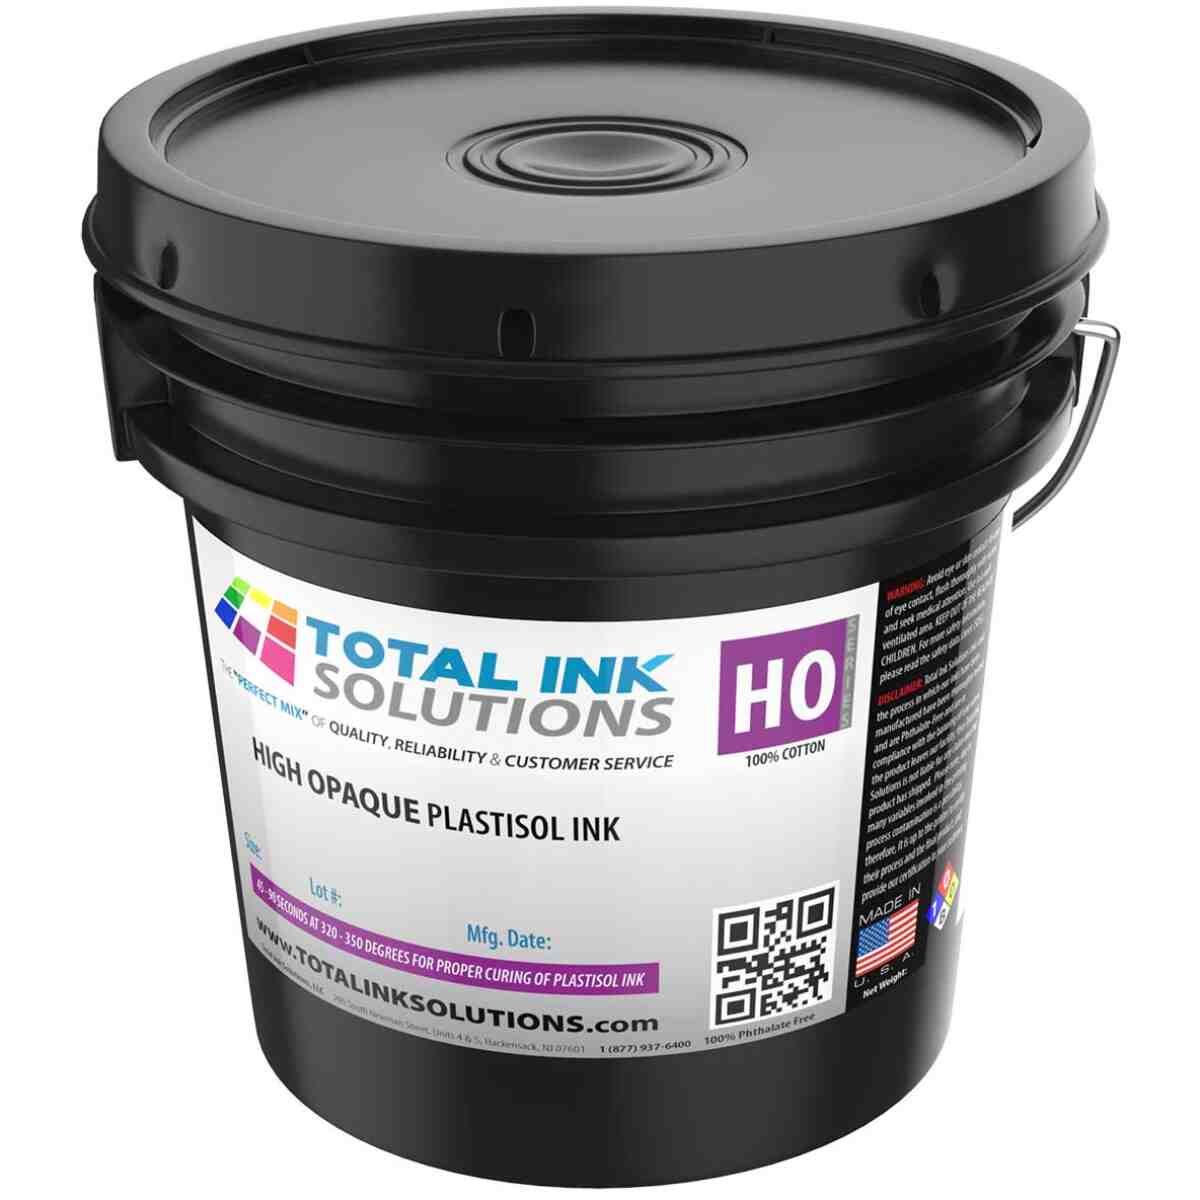 High Opaque Plastisol Ink - Base TOTAL INK SOLUTIONS®